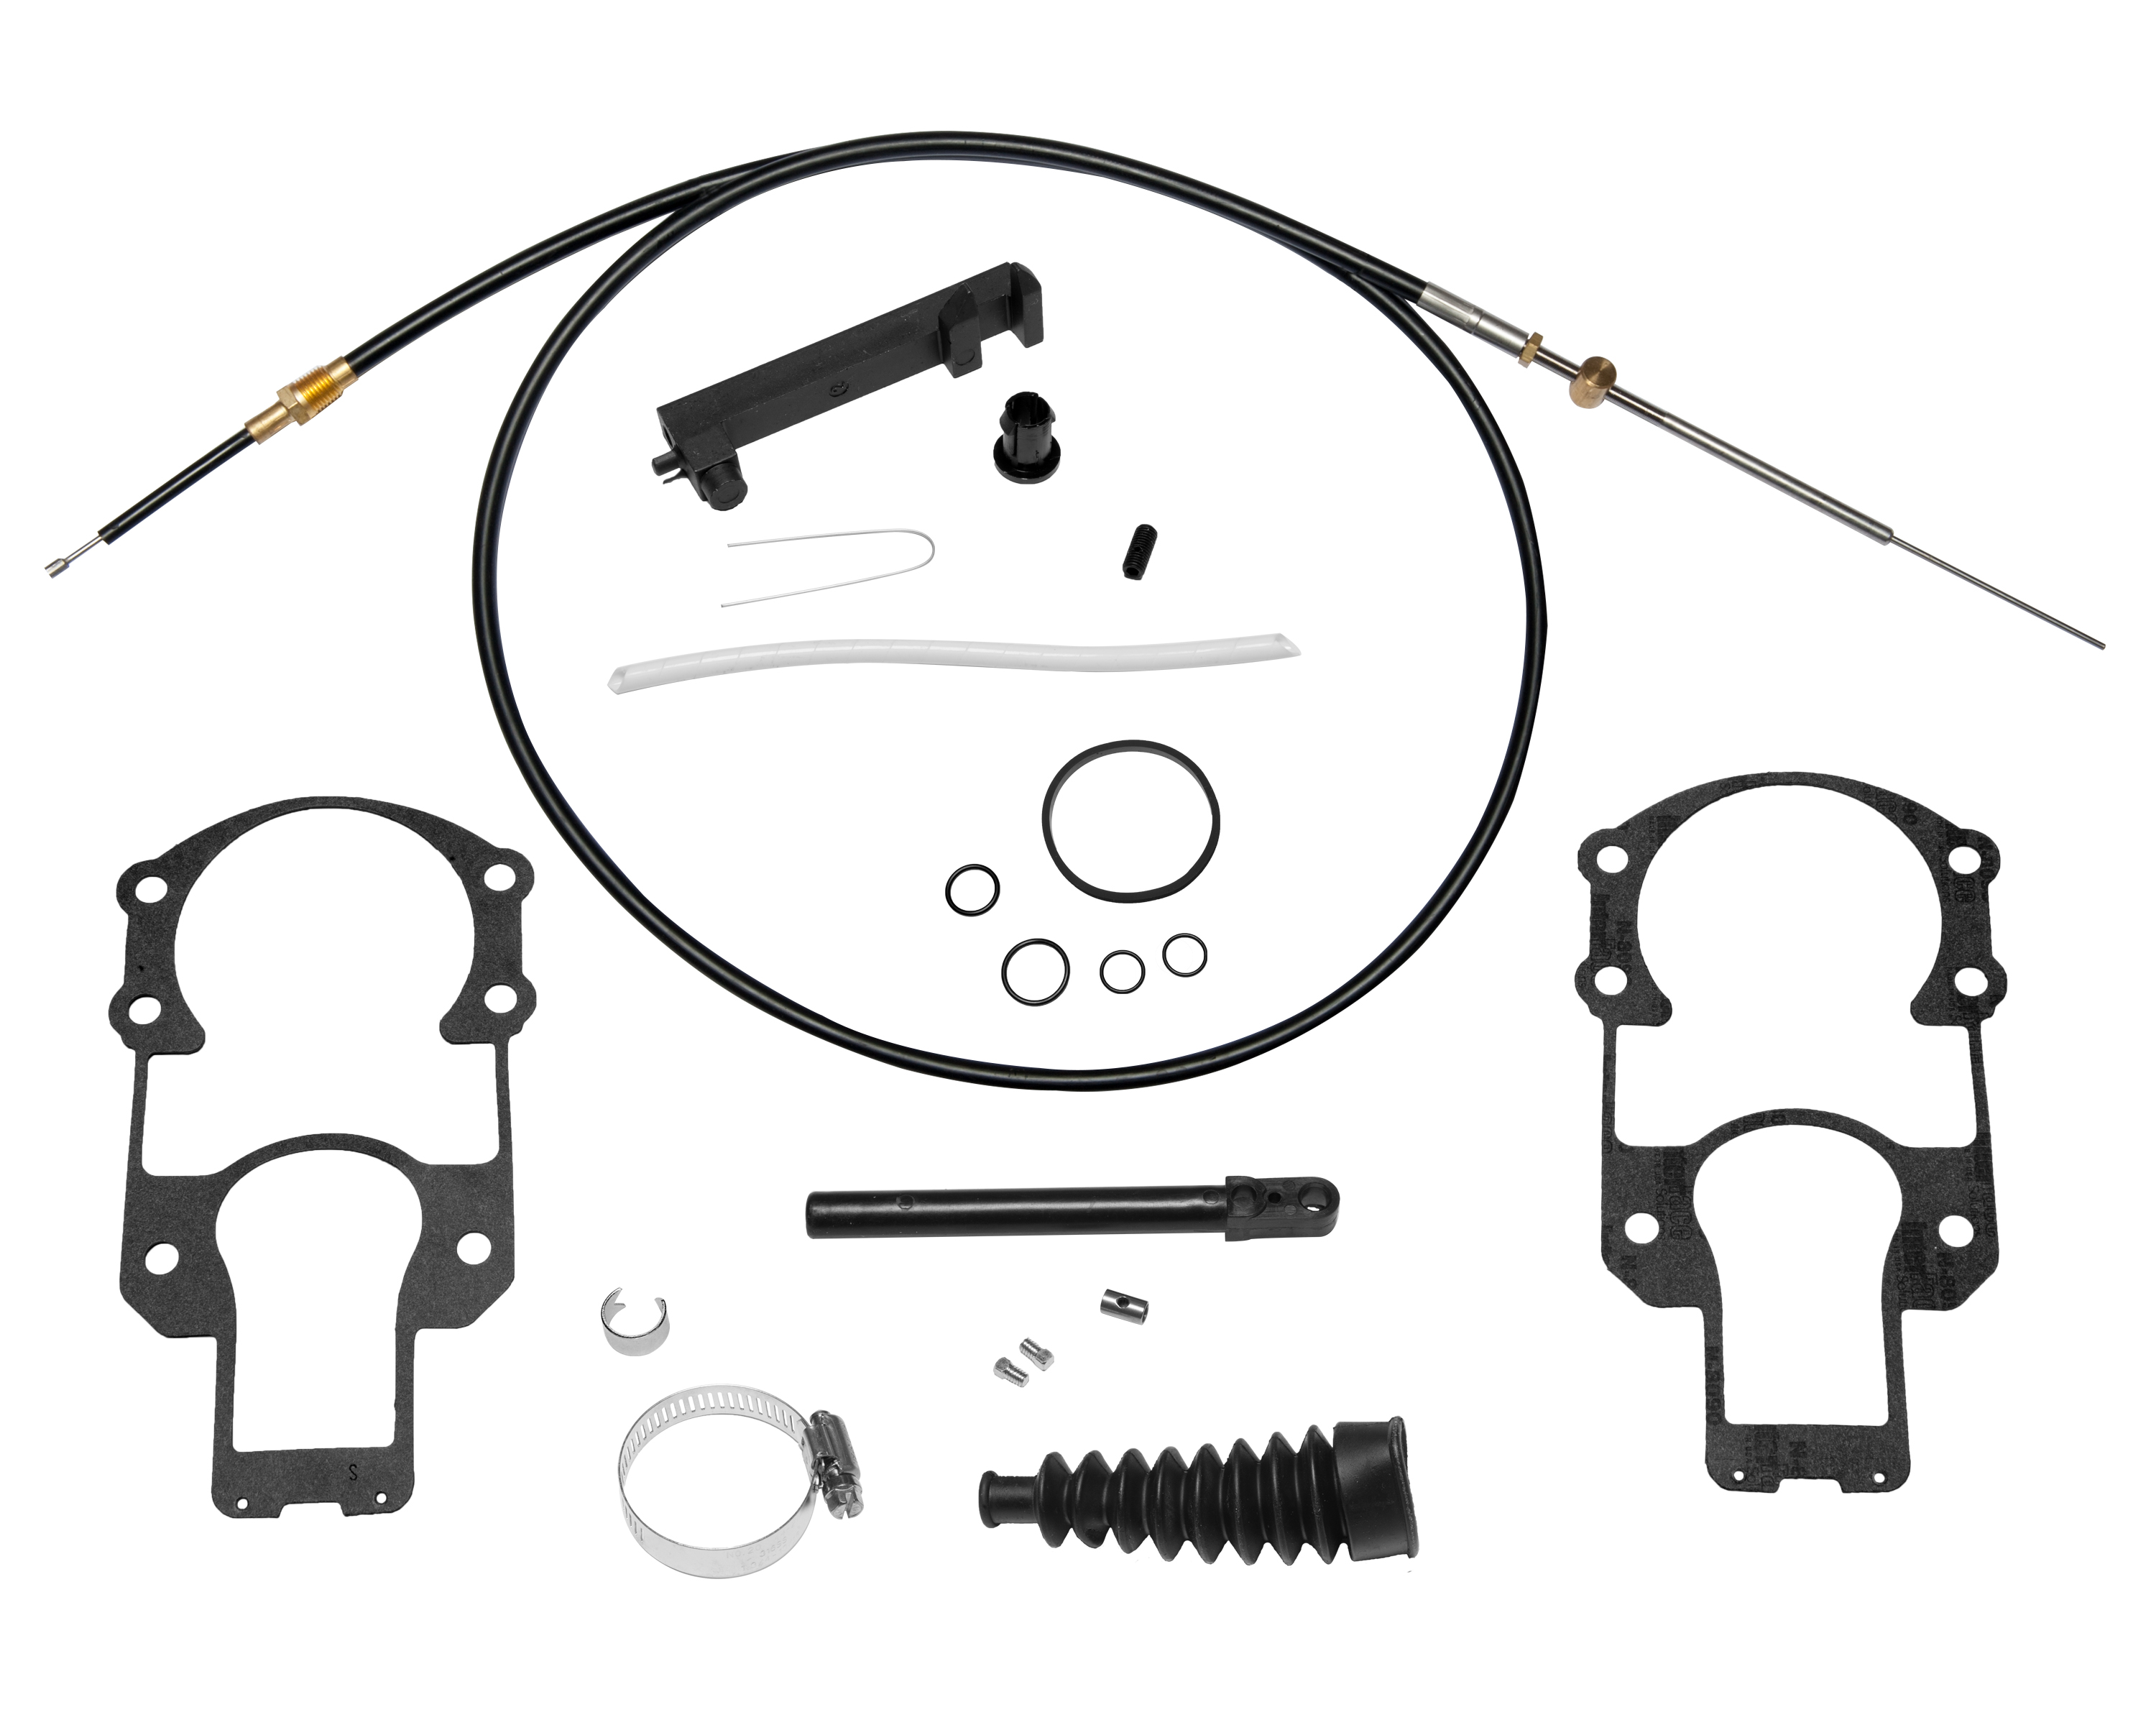 www.meinvoyager.de - LOWER SHIFT CABLE KIT